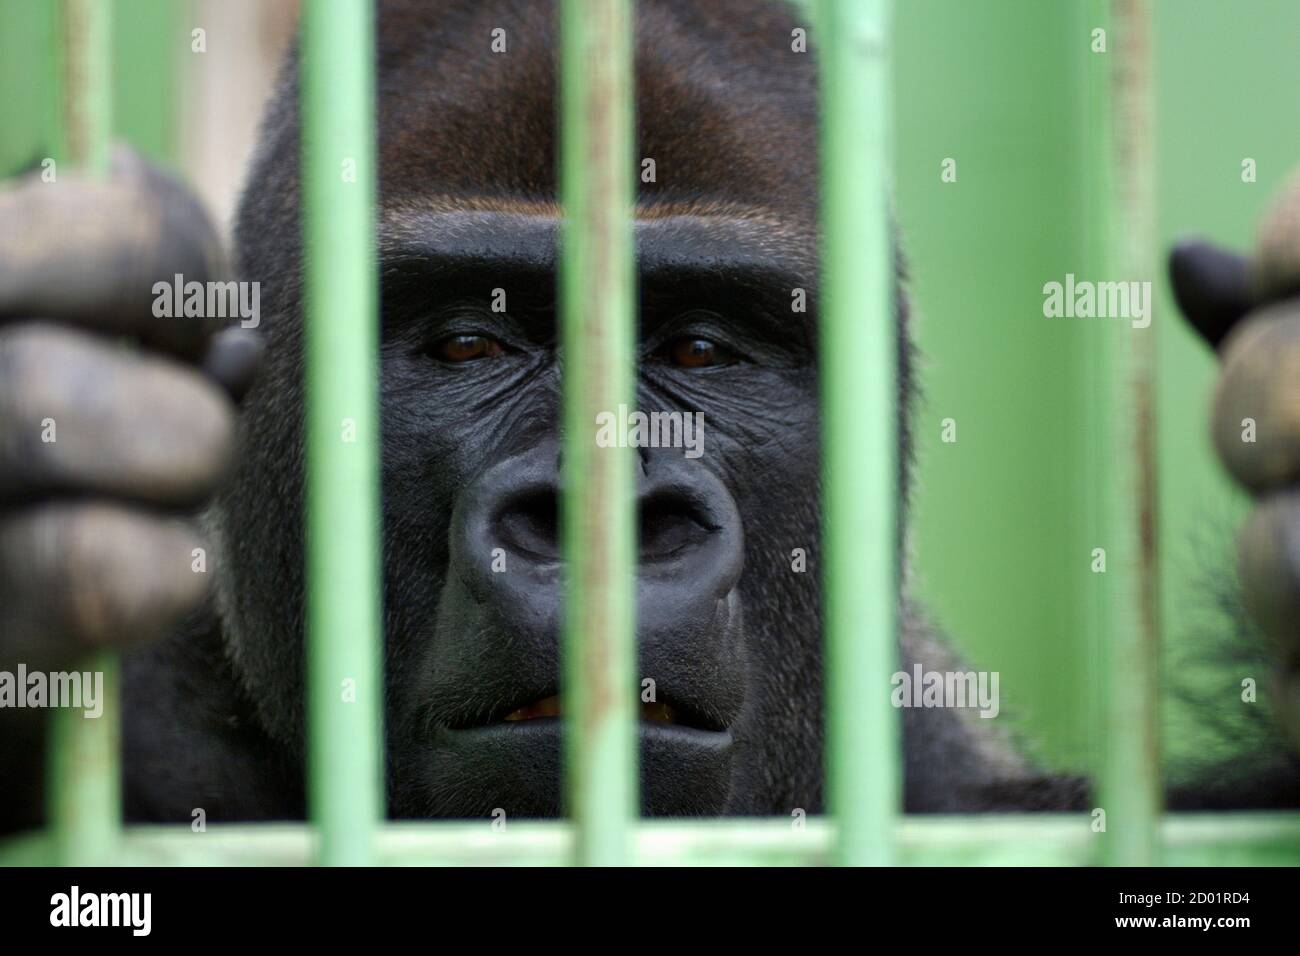 An Eastern Lowland Gorilla behind the bars of its cage in the Dubai zoo. Stock Photo